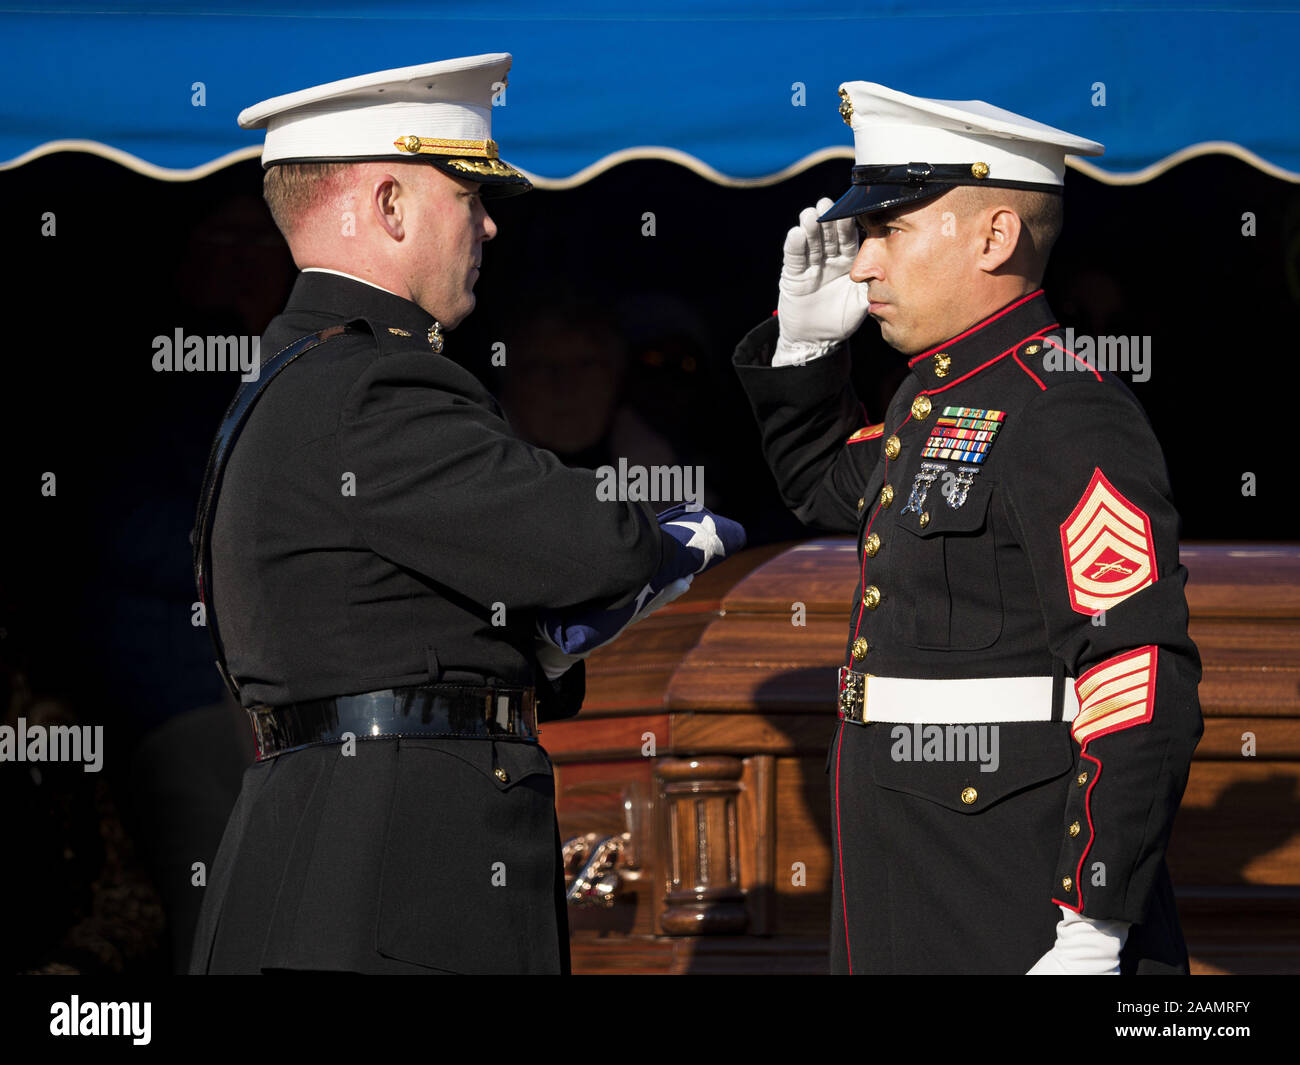 Des Moines, Iowa, USA. 22nd Nov, 2019. A member of the US Marine Corps Honor Guard, right, salutes U.S. Marine Corps Maj. JOHN SHECKELLS, left, during the reinterment service of US Marine Reserve Corps Private Channing Whitaker. Whitaker died in the Battle of Tarawa on Nov. 22, 1943. He was buried on Betio Island, in the Gilbert Islands, and his remains were recovered in March 2019. He was identified by a DNA match with surviving family members in Iowa. Credit: ZUMA Press, Inc./Alamy Live News Stock Photo